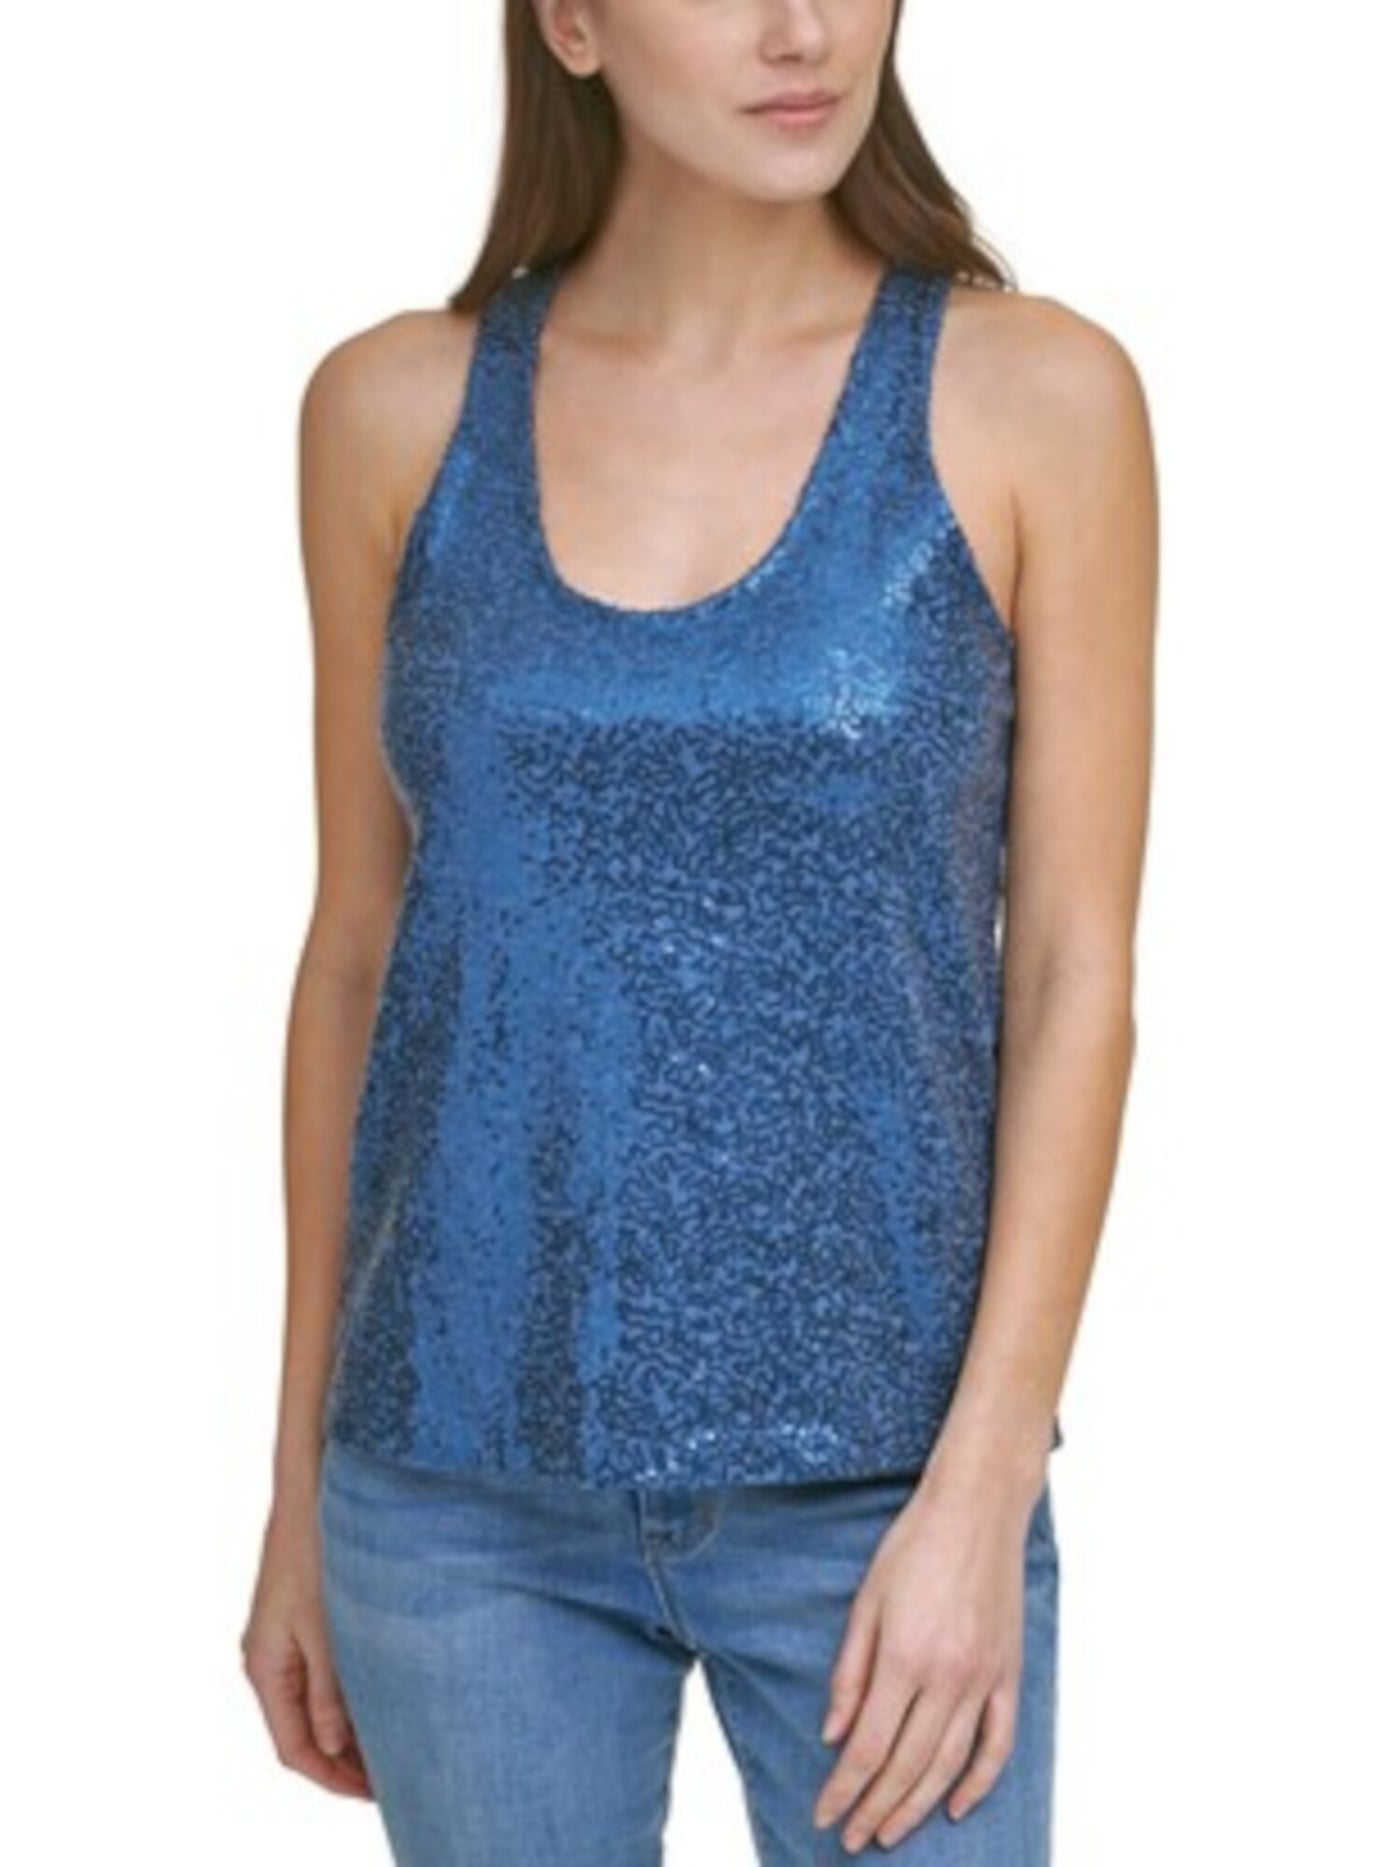 DKNY Womens Blue Stretch Sequined Sleeveless Scoop Neck Party Tank Top M